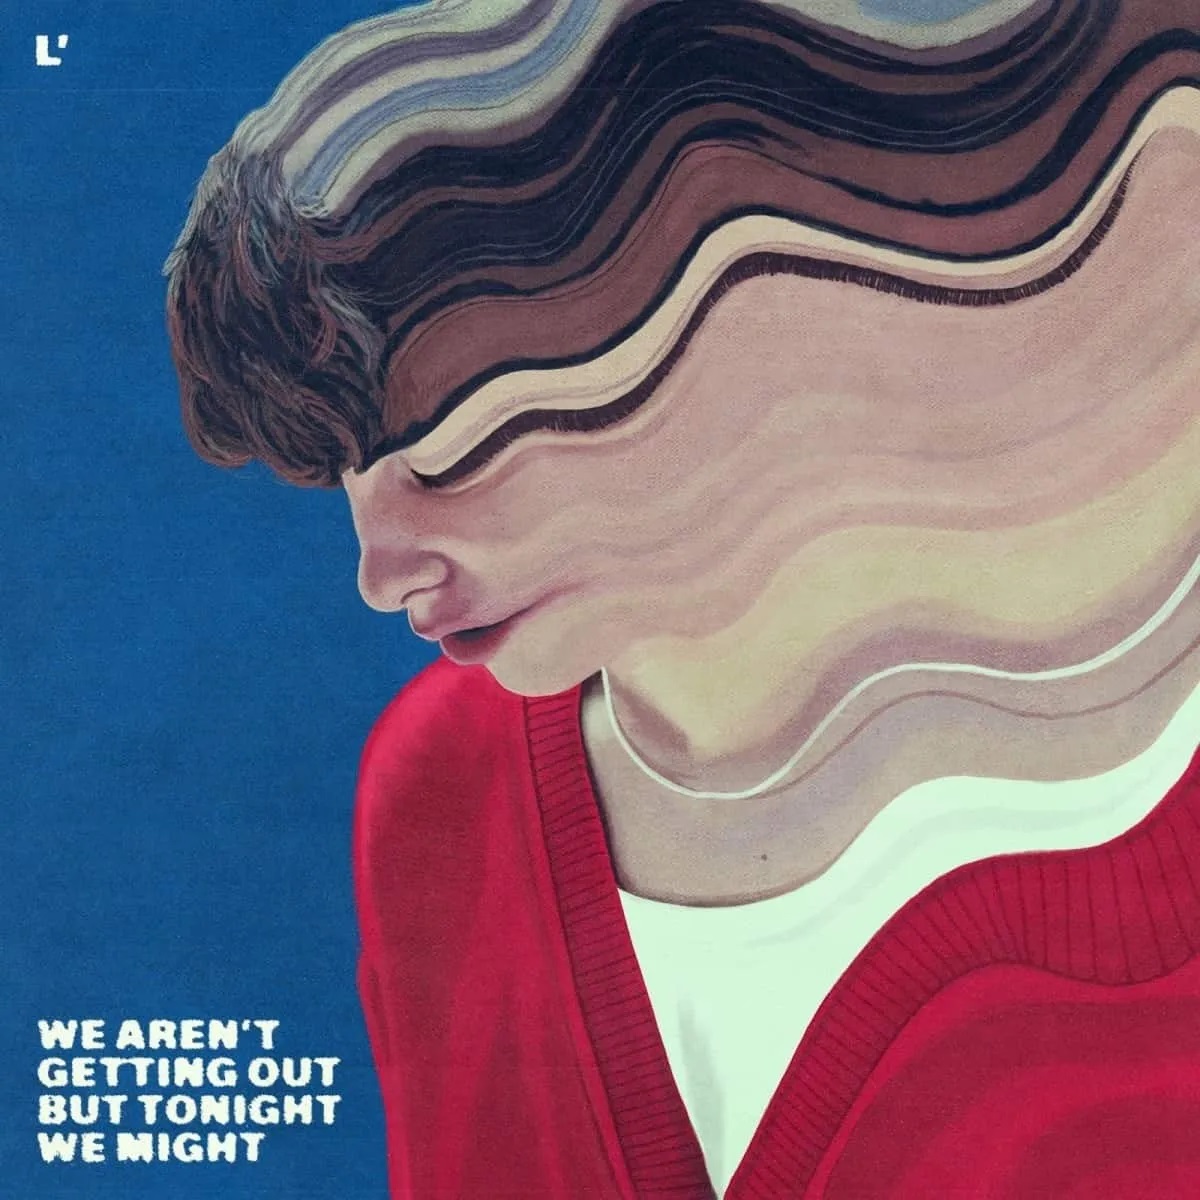 L'objectif - We Aren't Getting Out But Tonight We Might EP